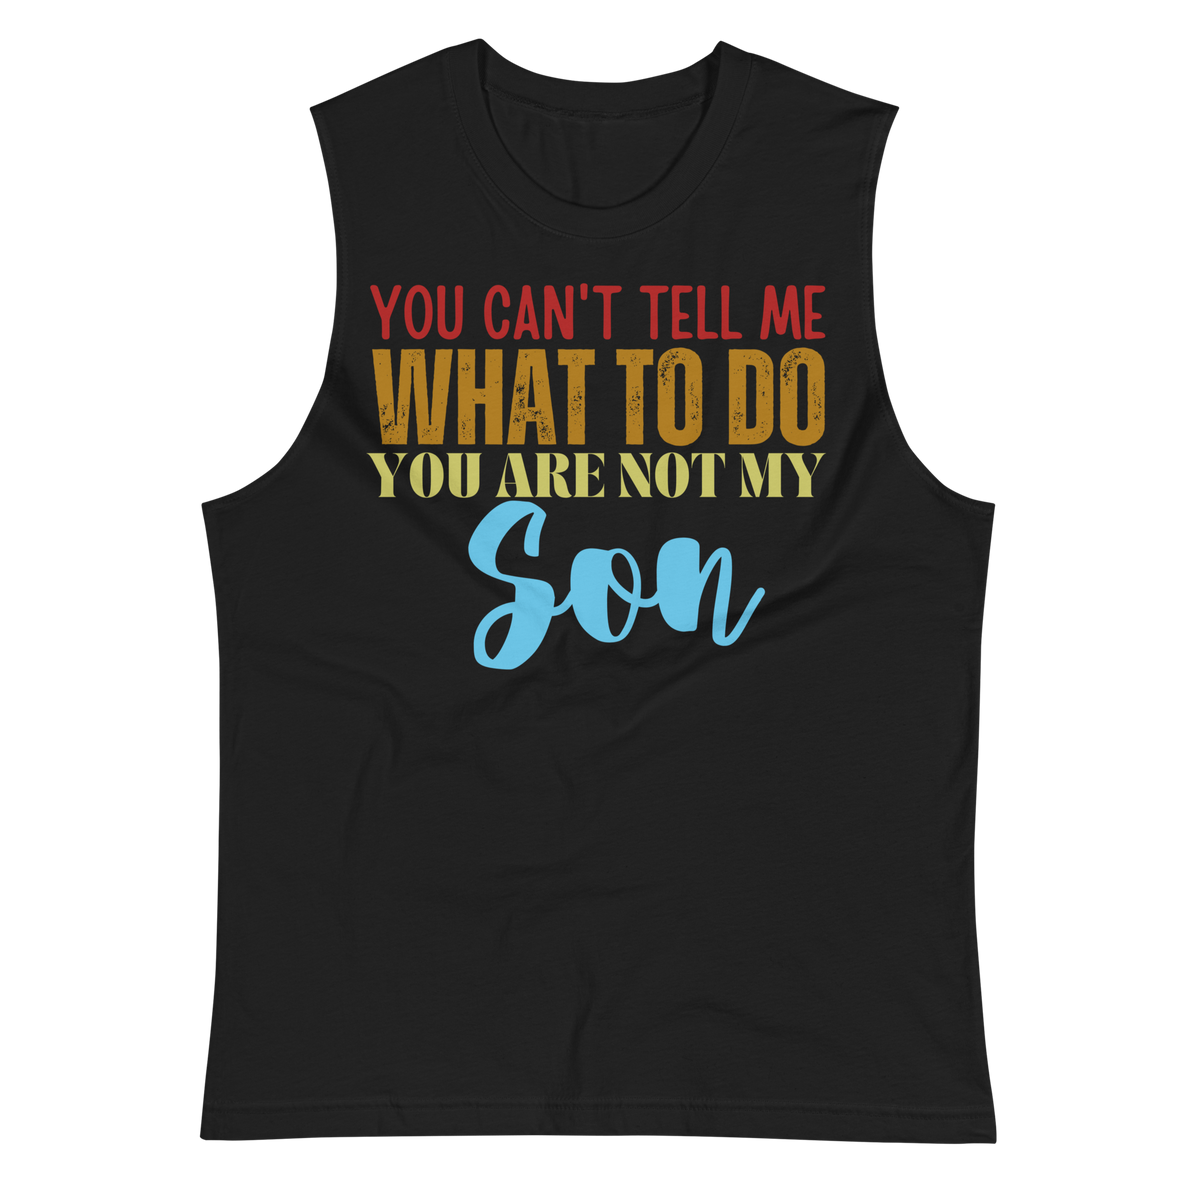 Dad Shirt, Fathers Day Shirt, Funny Mens Shirt, Funny Dad Shirt, Tell me what to do, Gift for him, Gift for her, New Papa Gift, Funny Mom Shirt, Mom Shirt, New Dad Shirt, Father Shirt, Dad tee, You Can't tell me What To Do You Are Not My Son Shirt, Muscle Shirt, Sleeveless Shirt